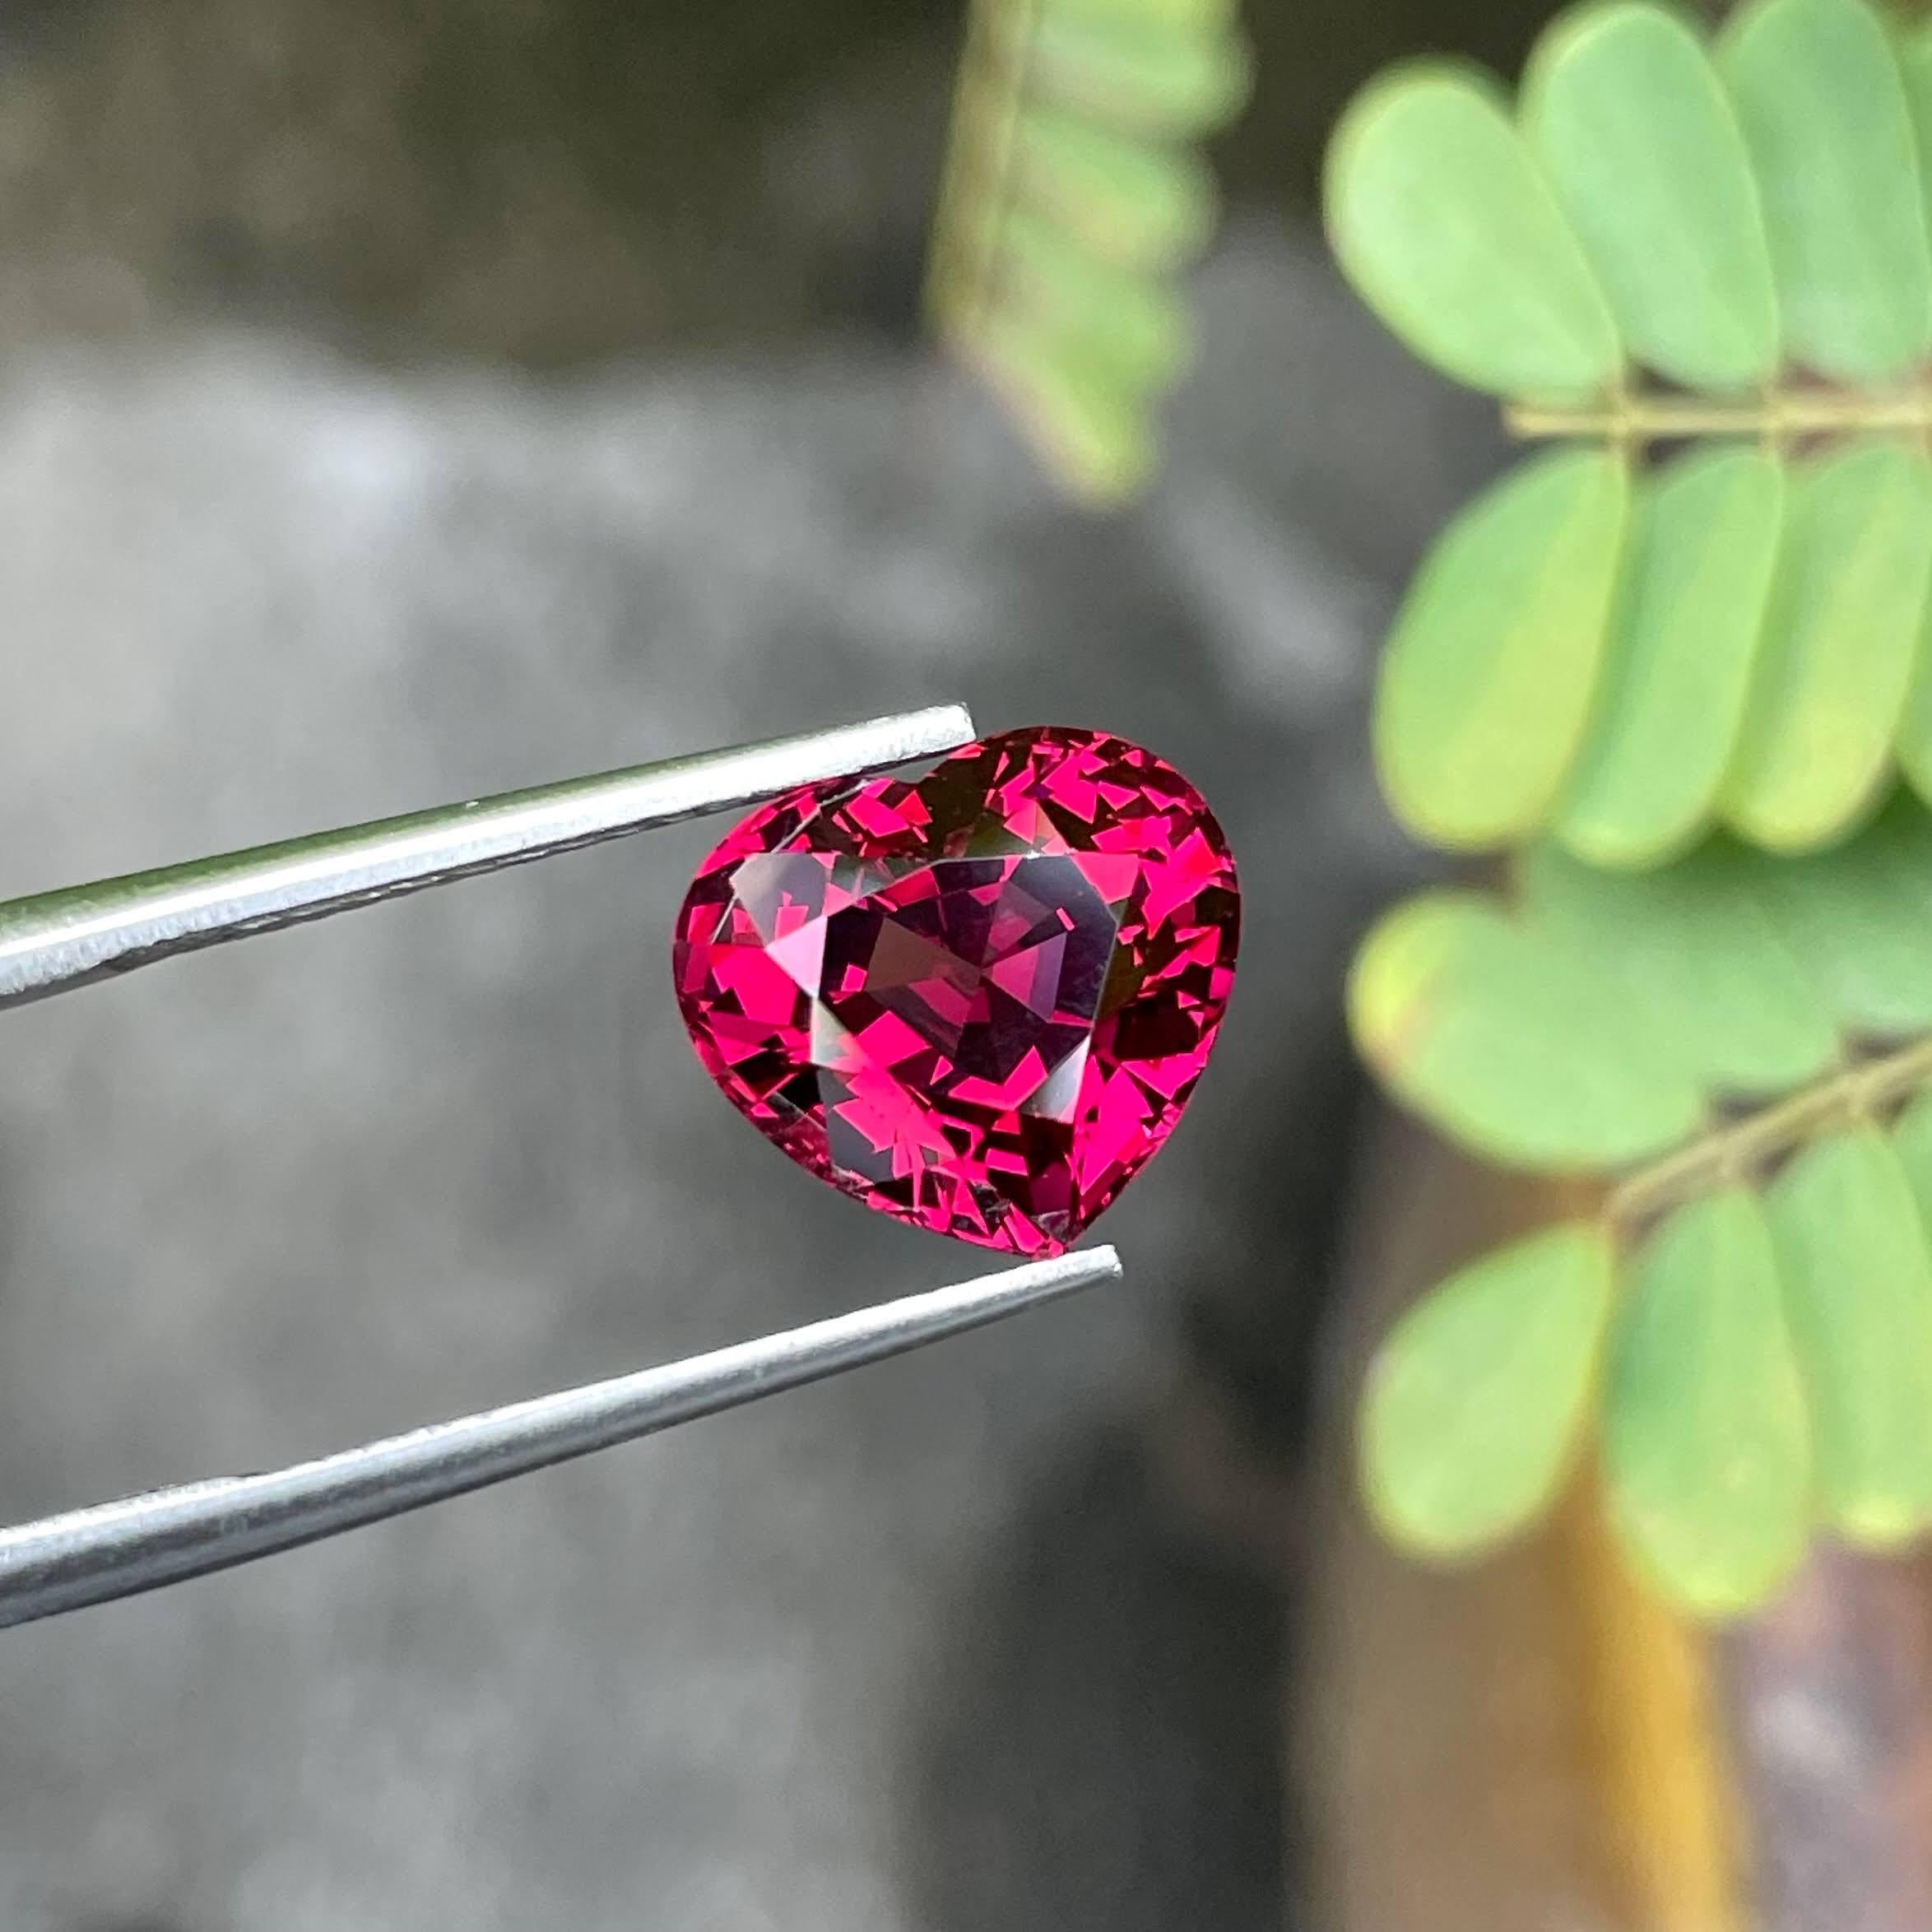 Weight 6.0 carats 
Dimensions 10.6x11.4x7 mm
Treatment none 
Origin Madagascar 
Clarity eye clean 
Shape heart 
Cut heart 




The 6.00 carats Heart Shaped Red Garnet from Madagascar is a stunning example of nature's beauty encapsulated in a